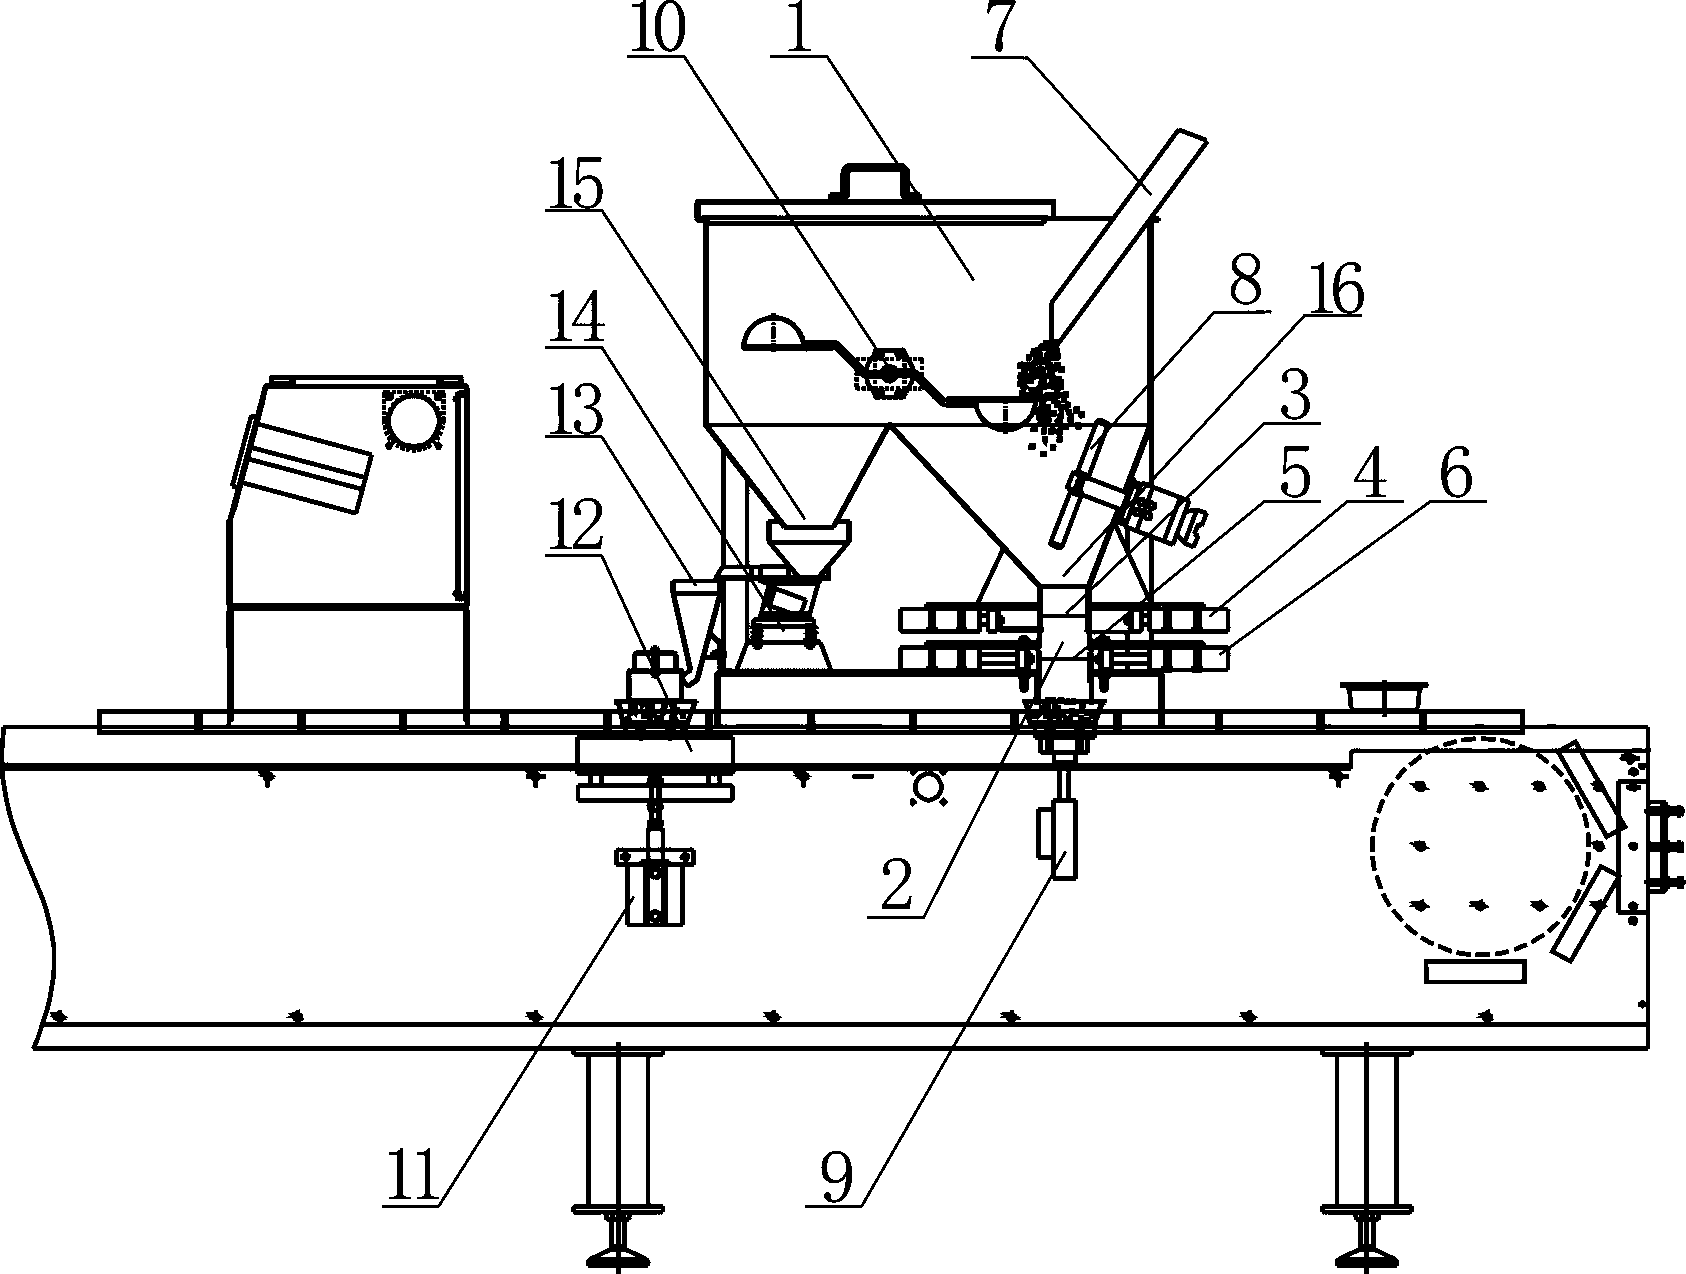 Multi-head automatic metering and filling system